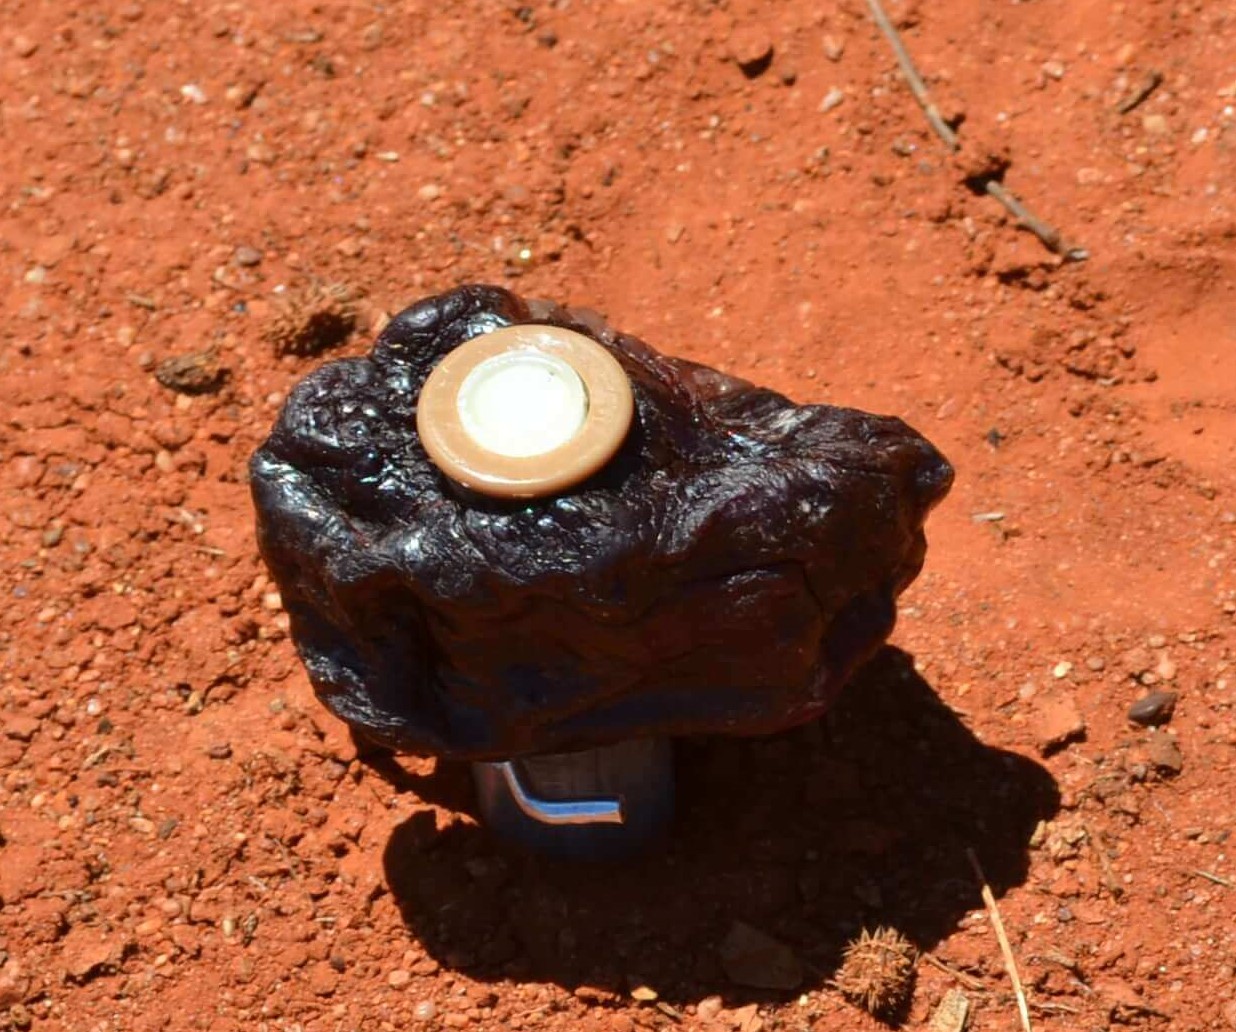 Canid pest ejector, cube of meat attached to spring loaded device in red soil